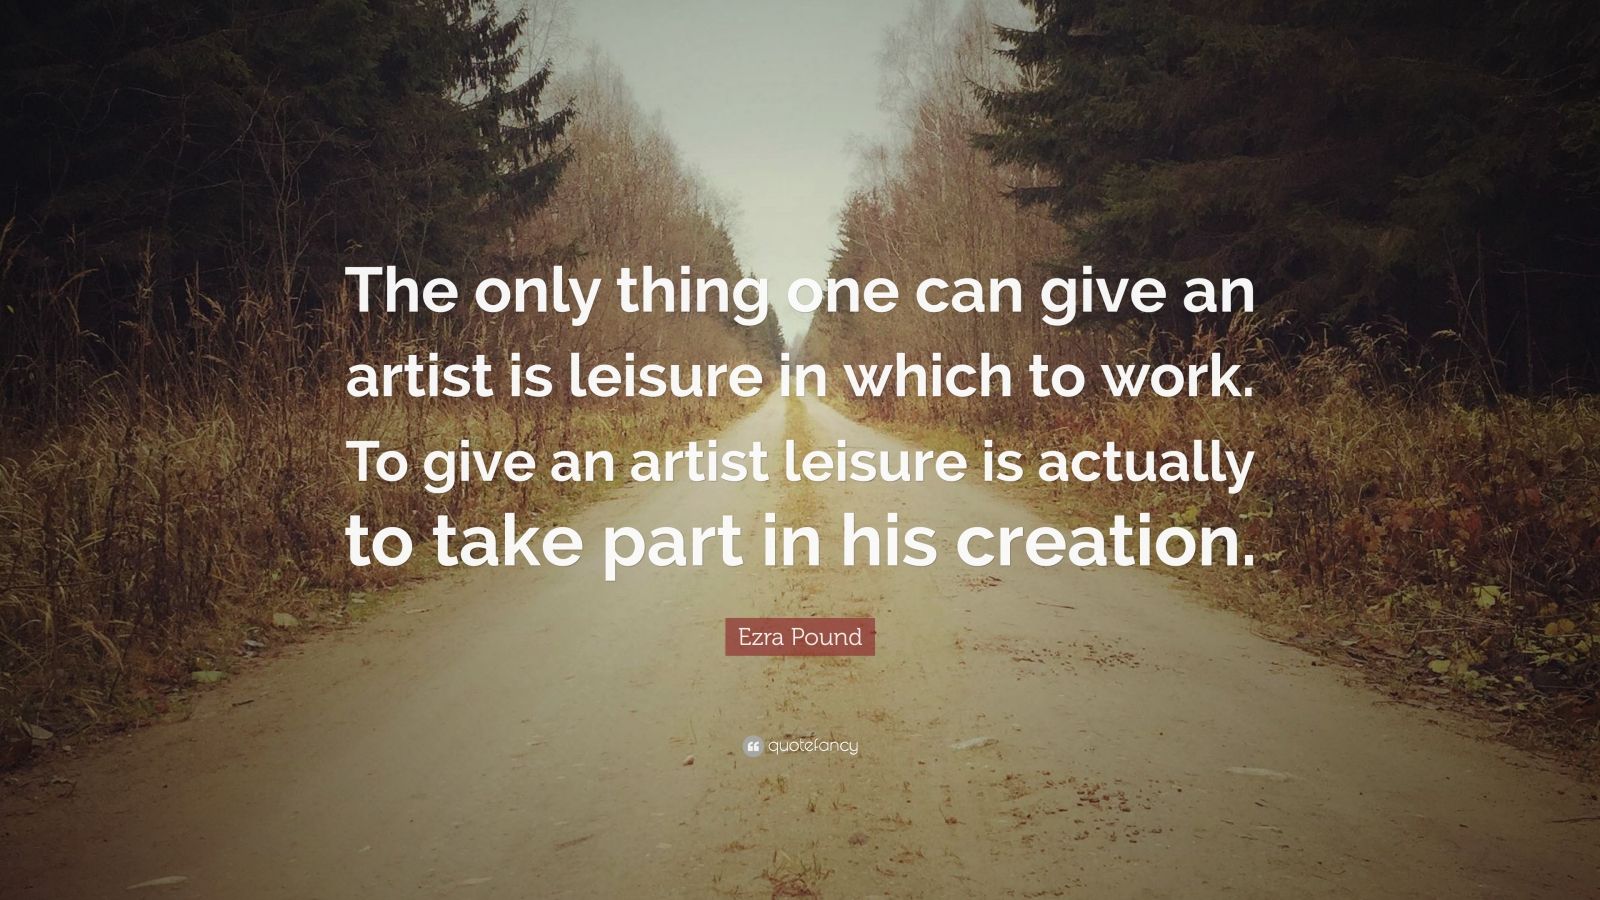 Ezra Pound Quote “The only thing one can give an artist